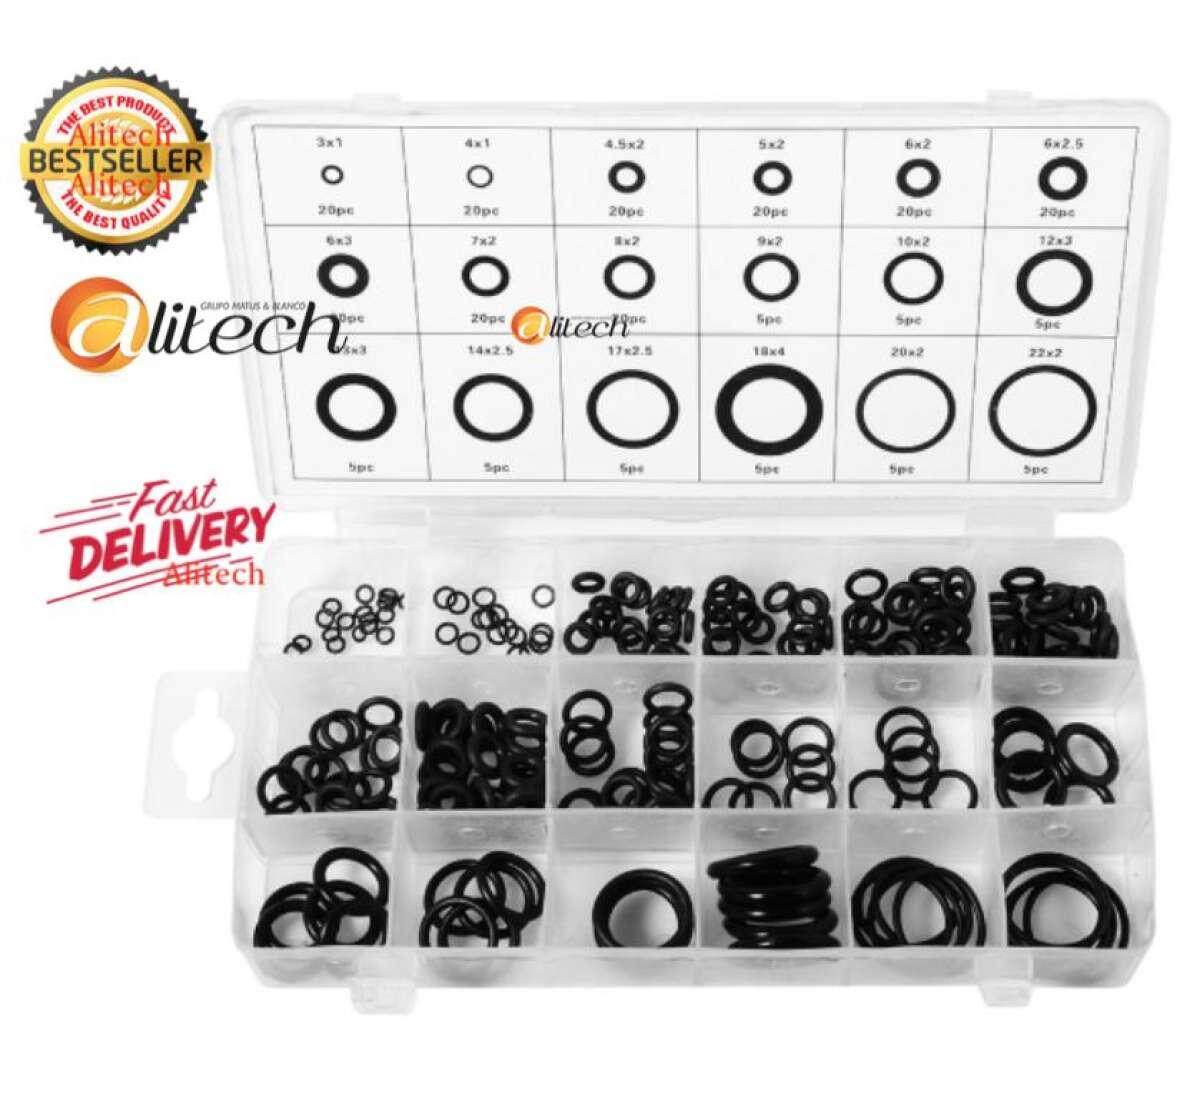 Eco ยางโอริง 225pcs O-Ring Assortment Nitrile Rubber Washer Seals NBR Kit 18 Sizes in Black with a Re-Sealable Plastic Box